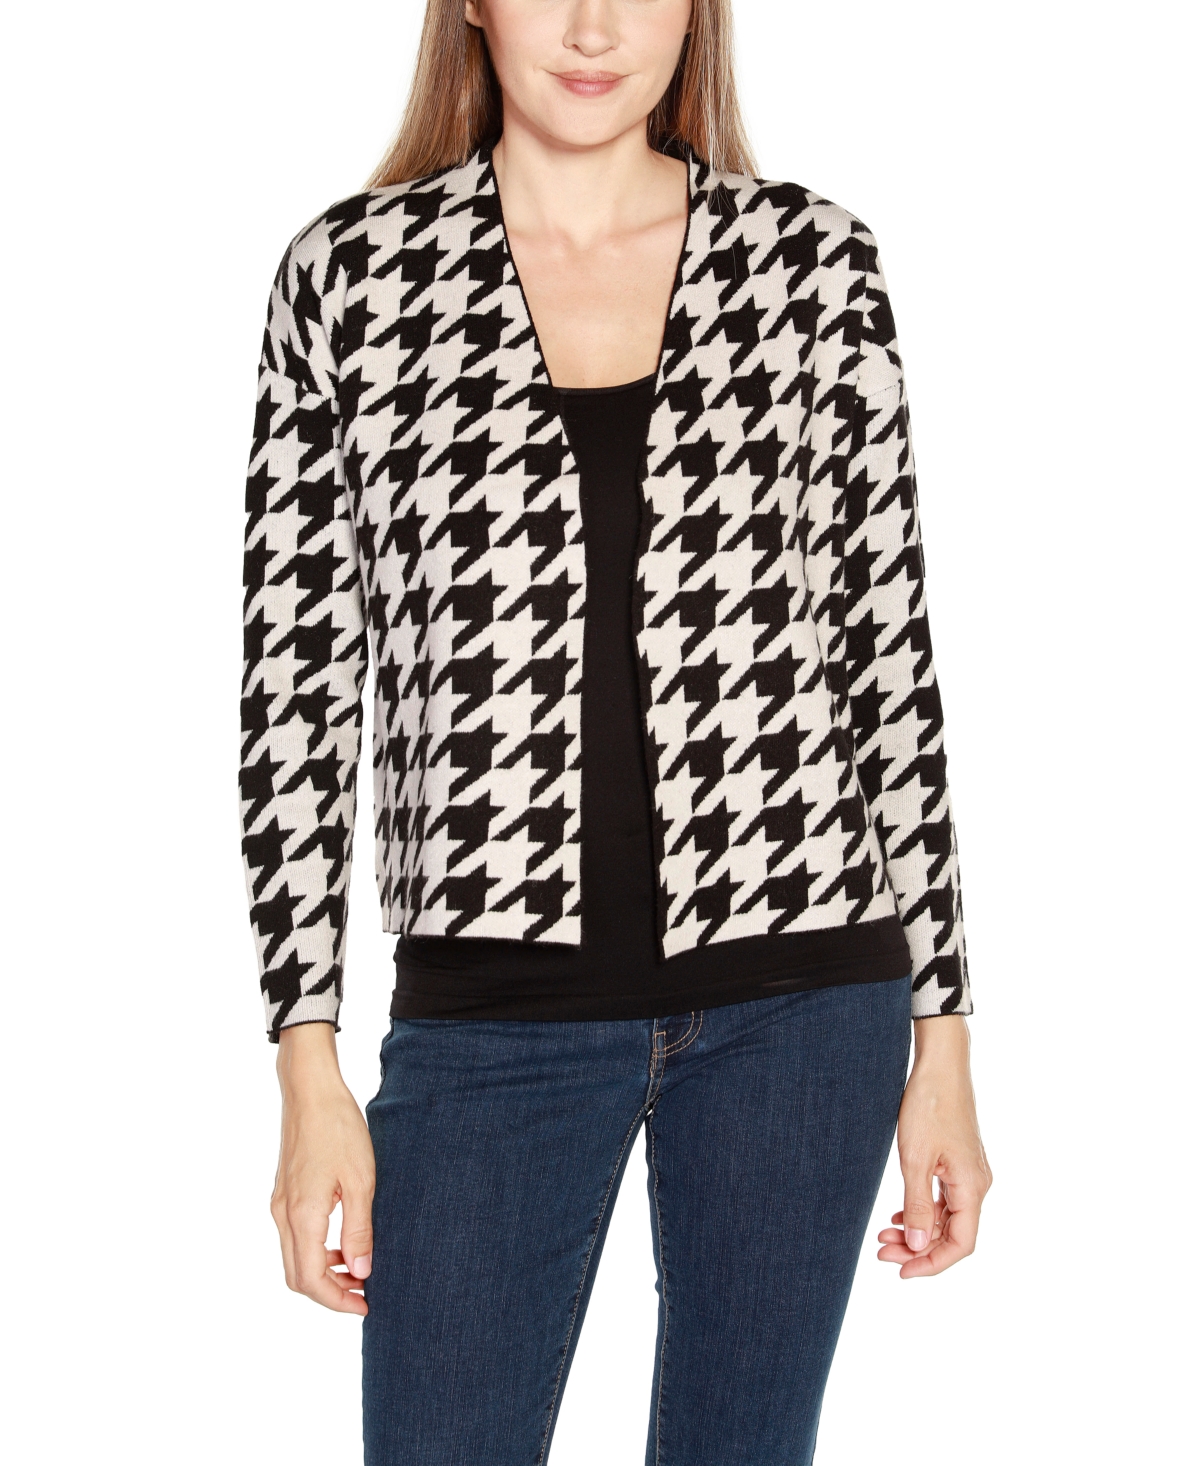 Belldini Women's Houndstooth Cropped Cardigan Sweater In Black,white